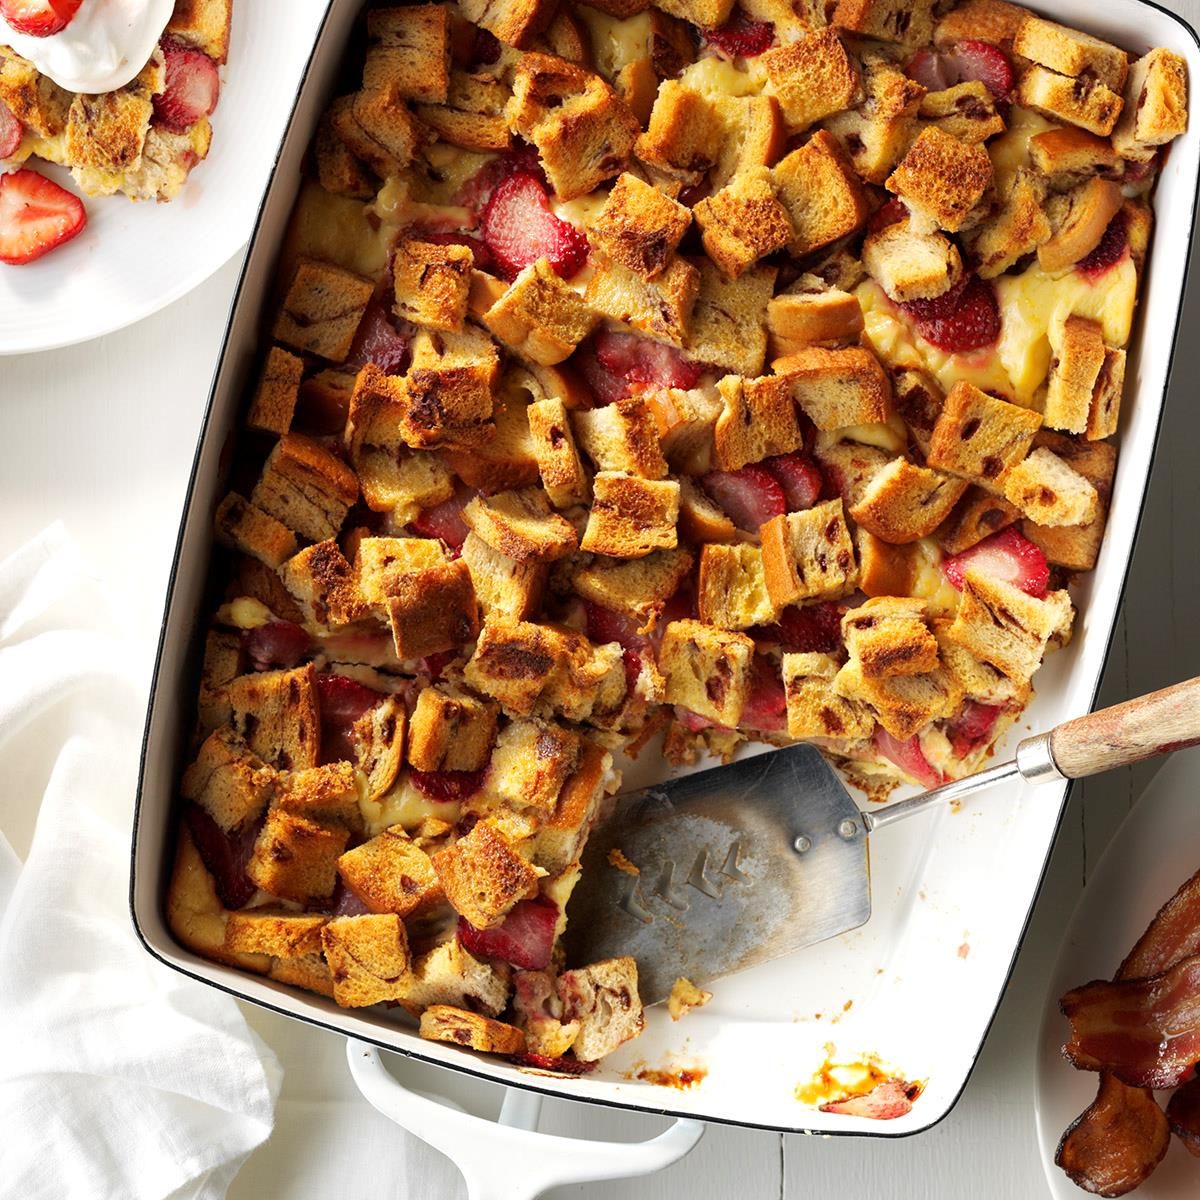 19 Breakfast Recipes to Make in Your 9x13 Baking Dish